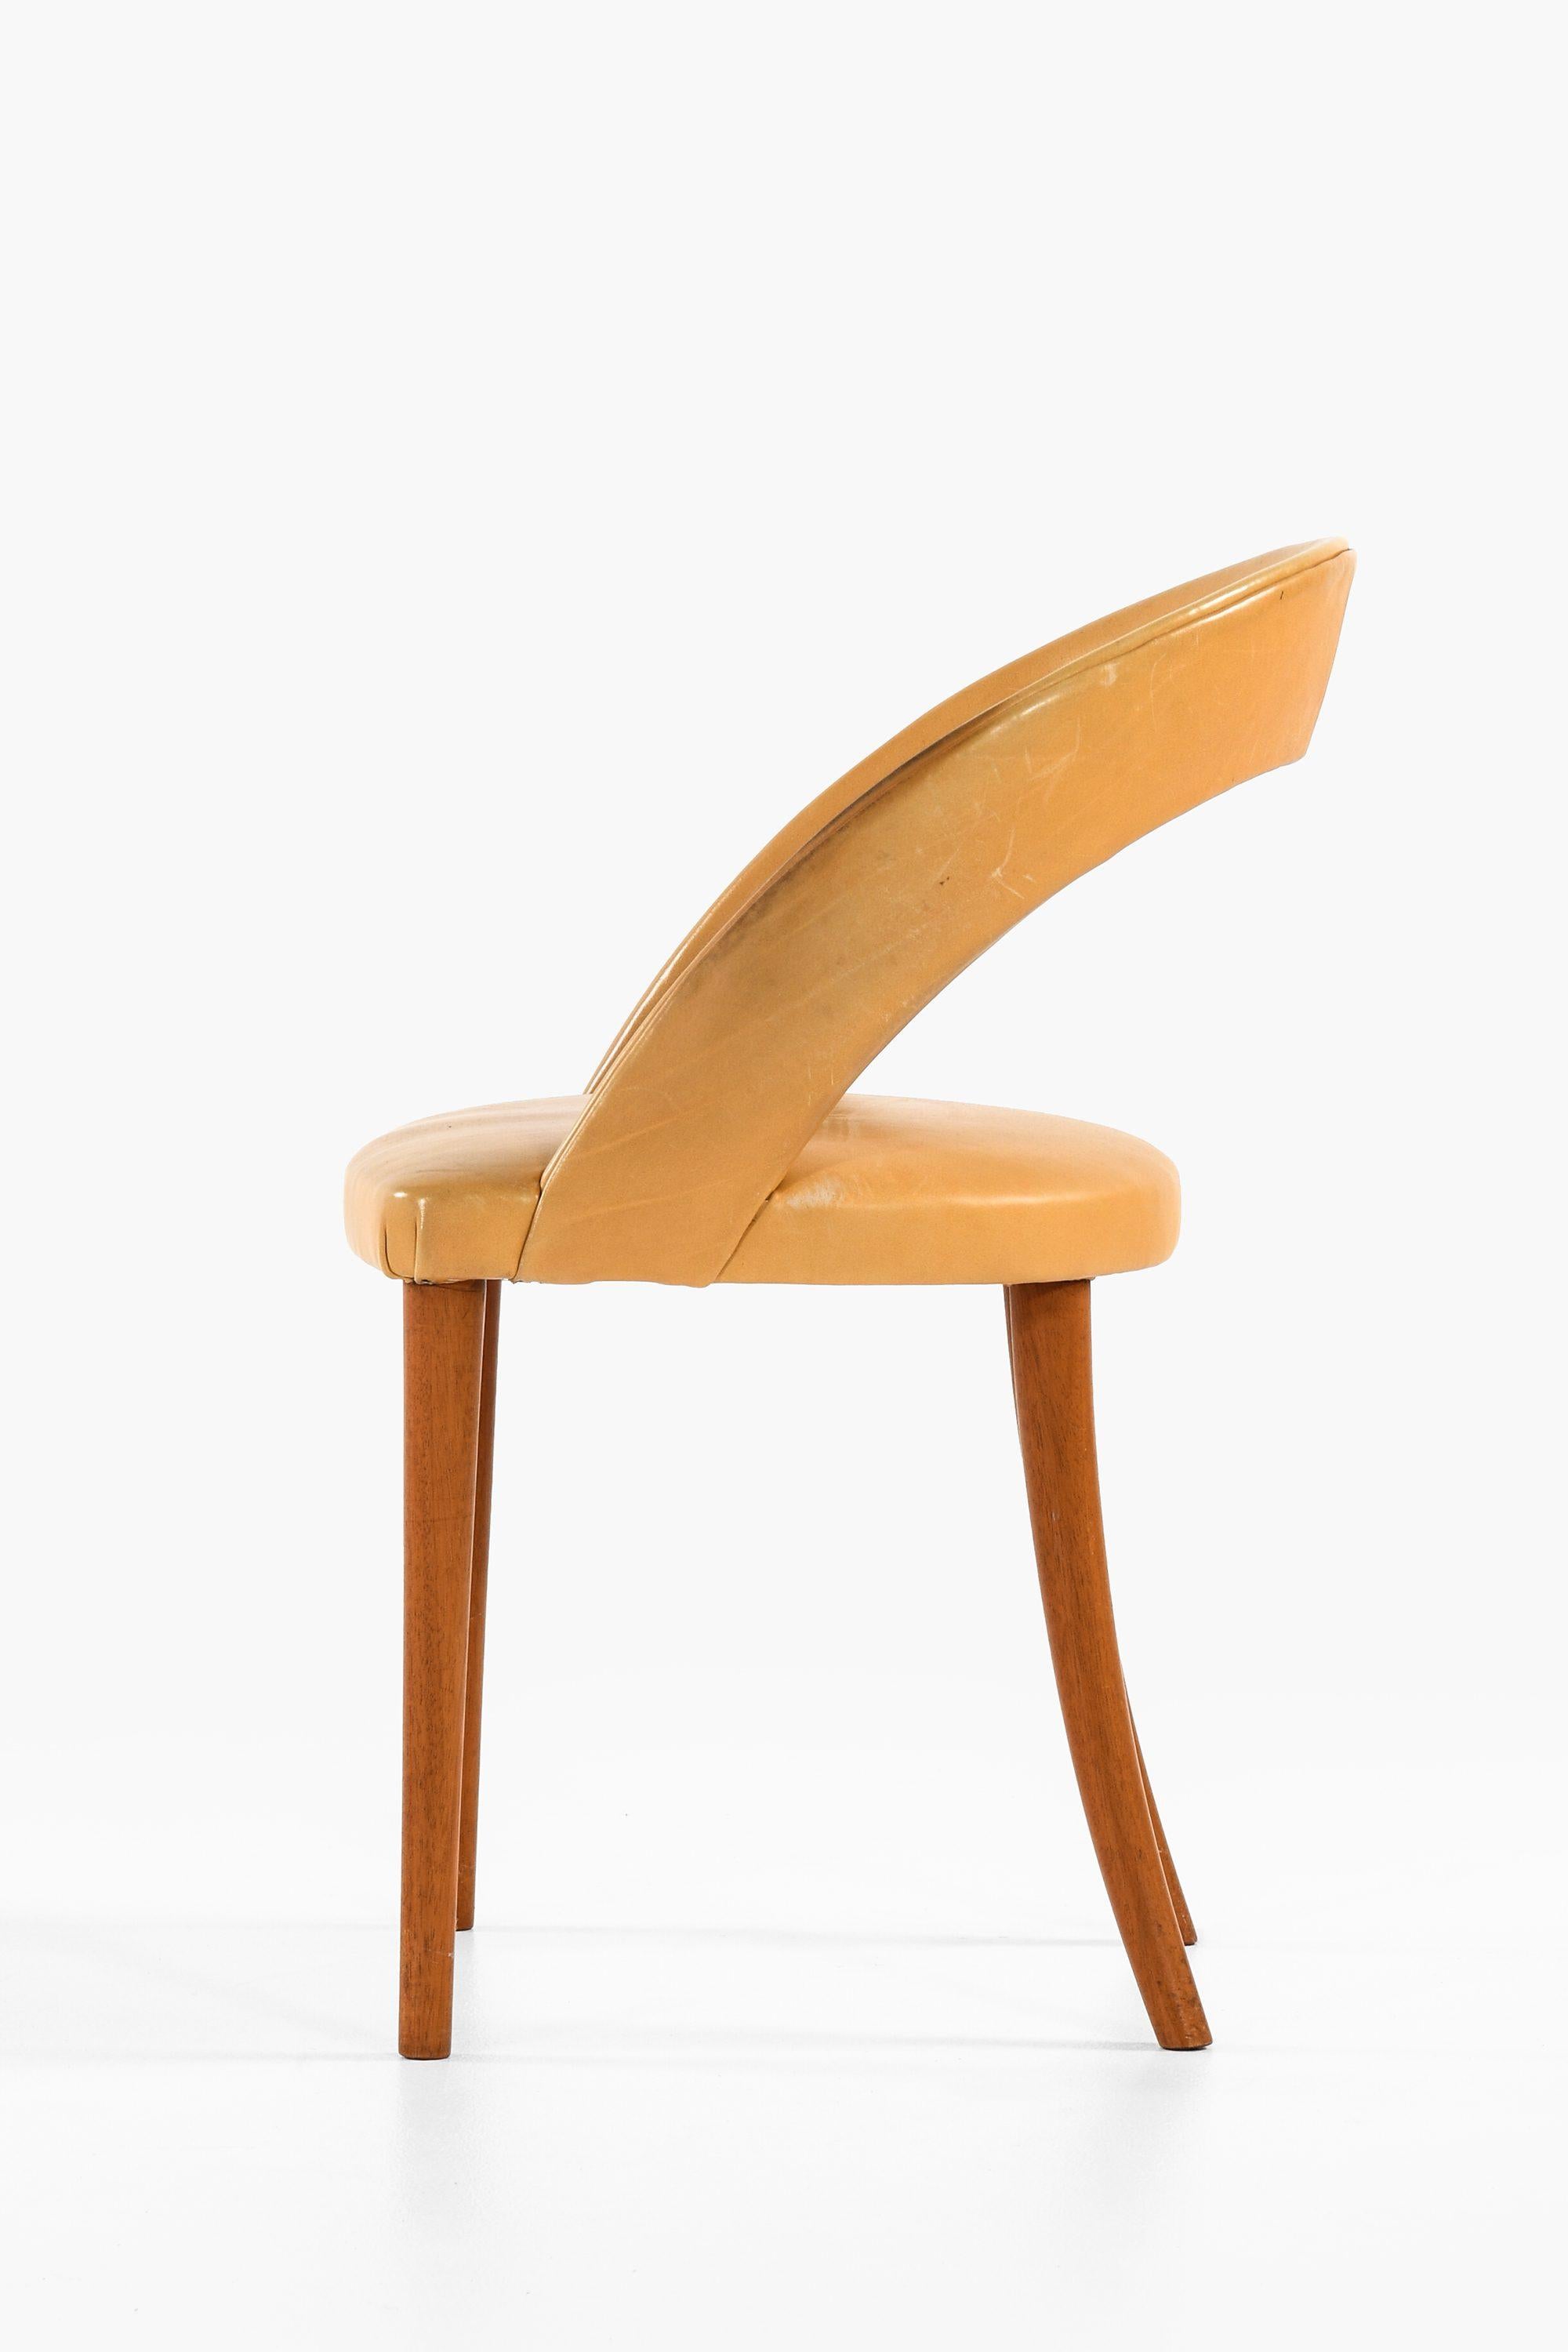 Scandinavian Modern Side Chair in Mahogany and Leather by Frode Holm, 1950s For Sale